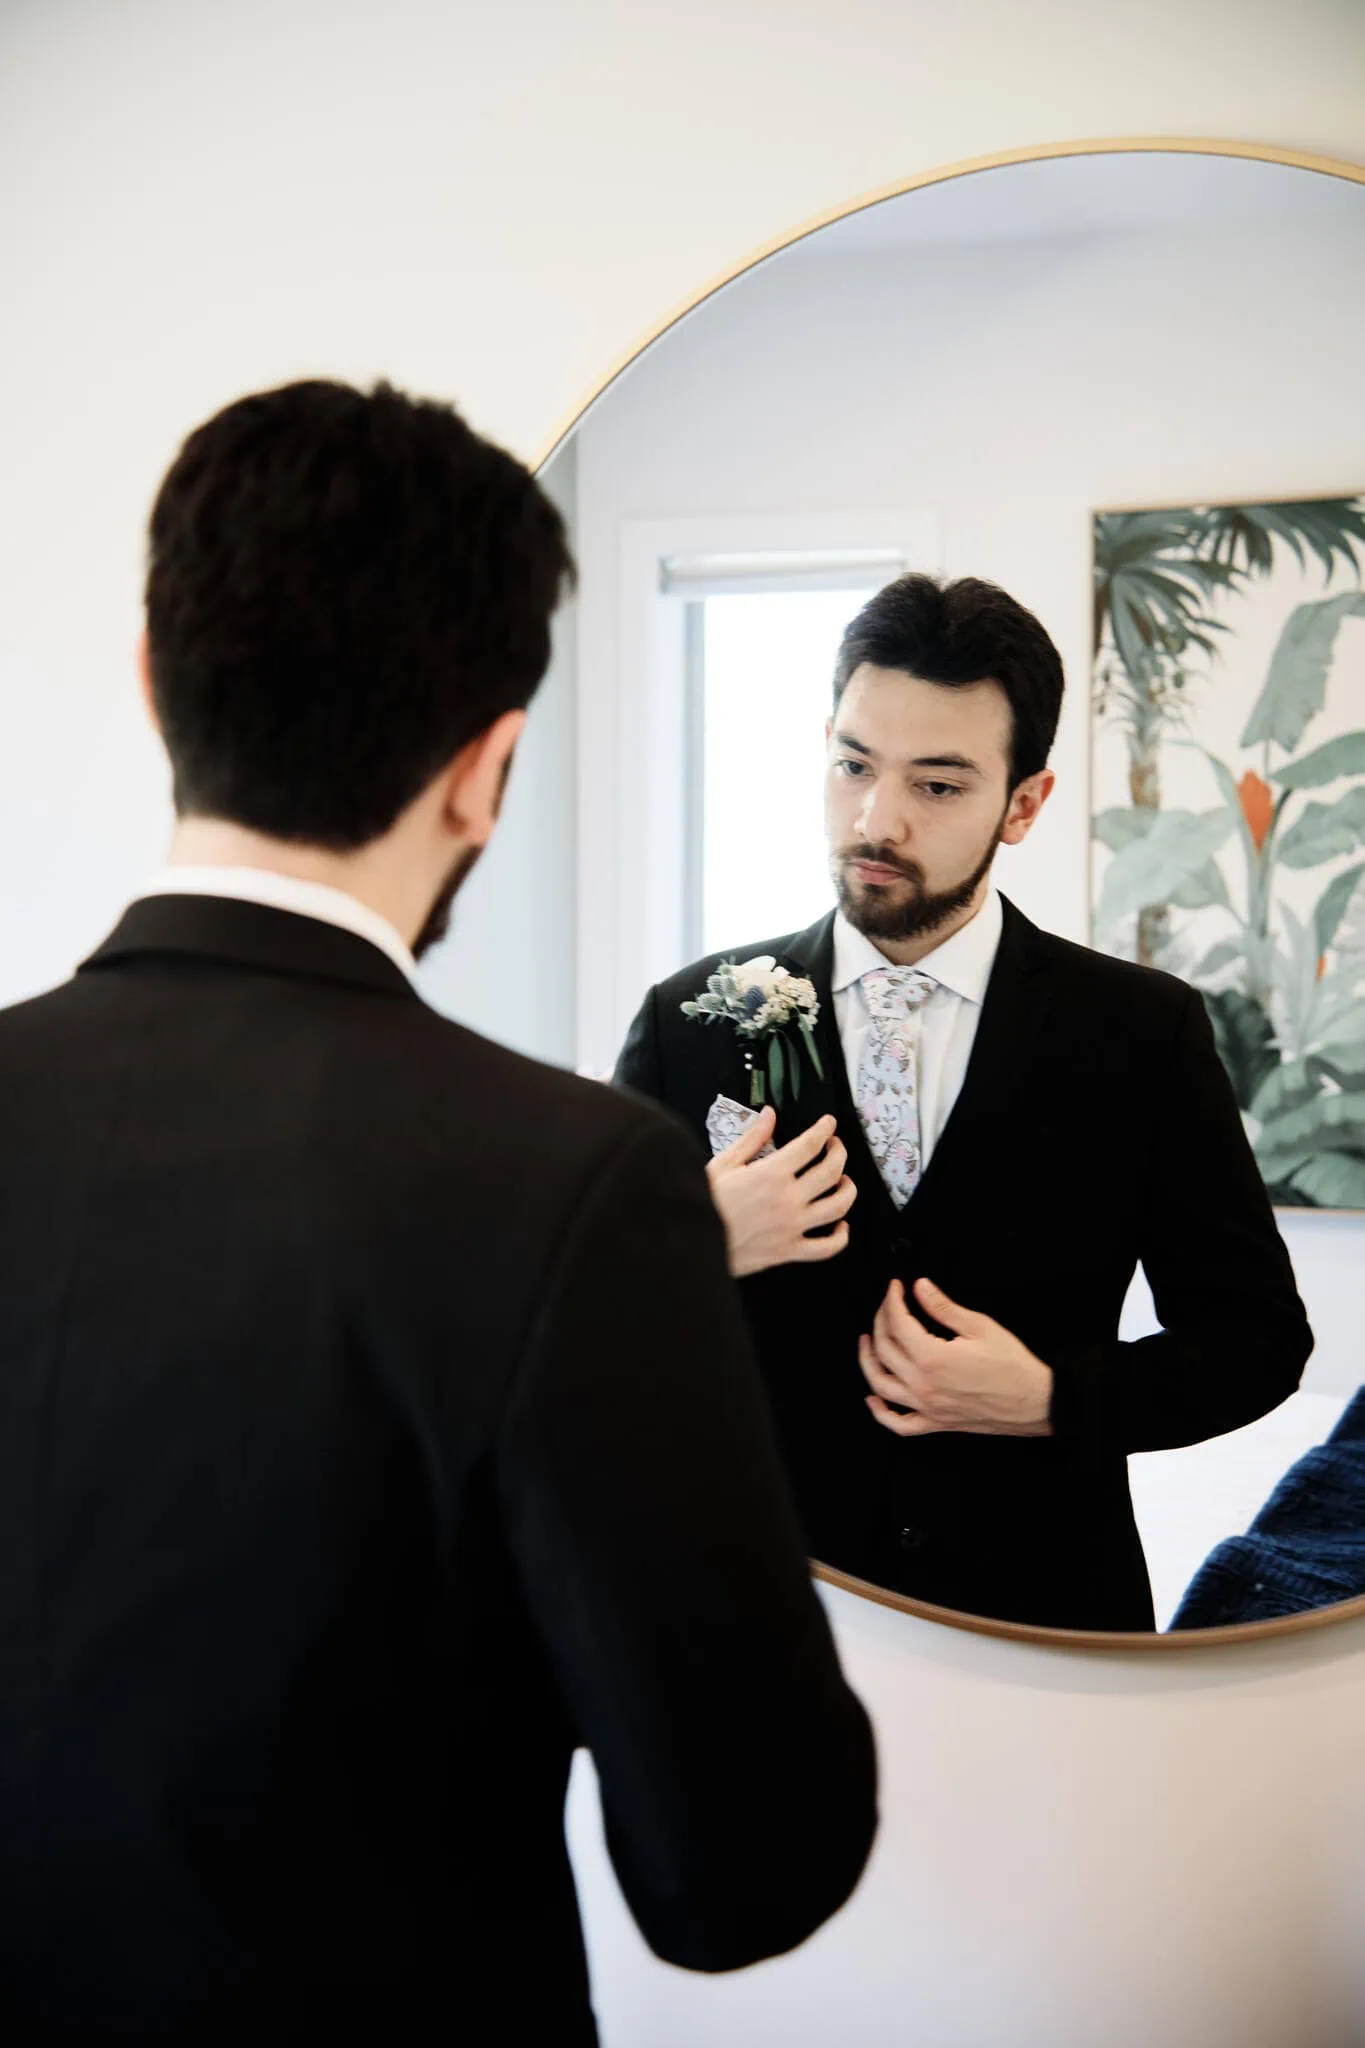 Carlos, wearing a suit, prepares in front of a mirror for an intimate Cecil Peak Heli Elopement Wedding.